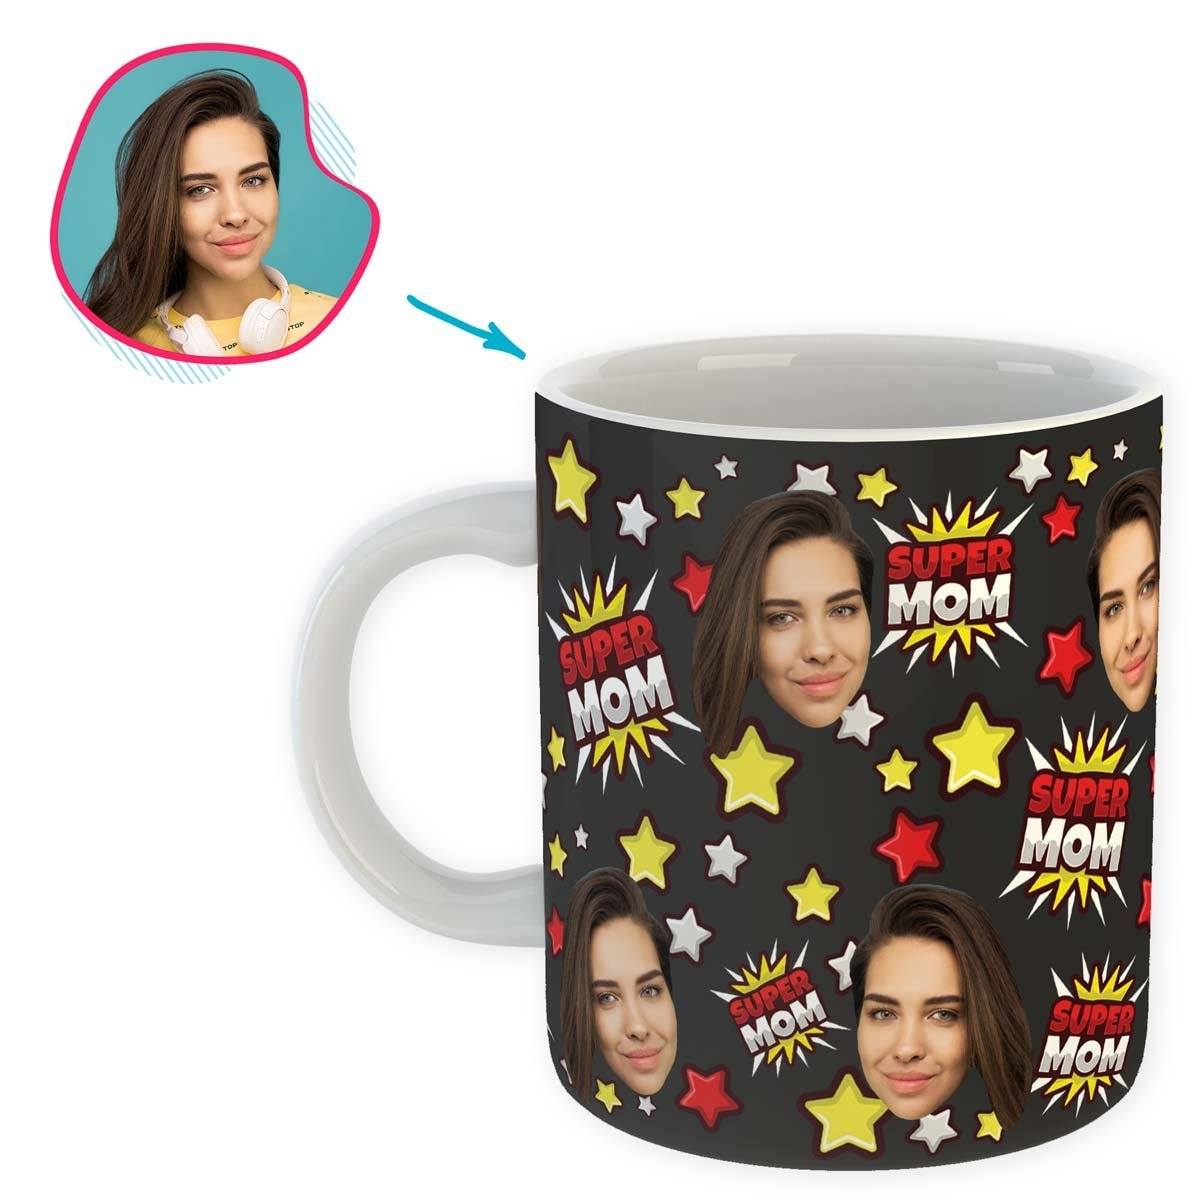 dark Super Mom mug personalized with photo of face printed on it